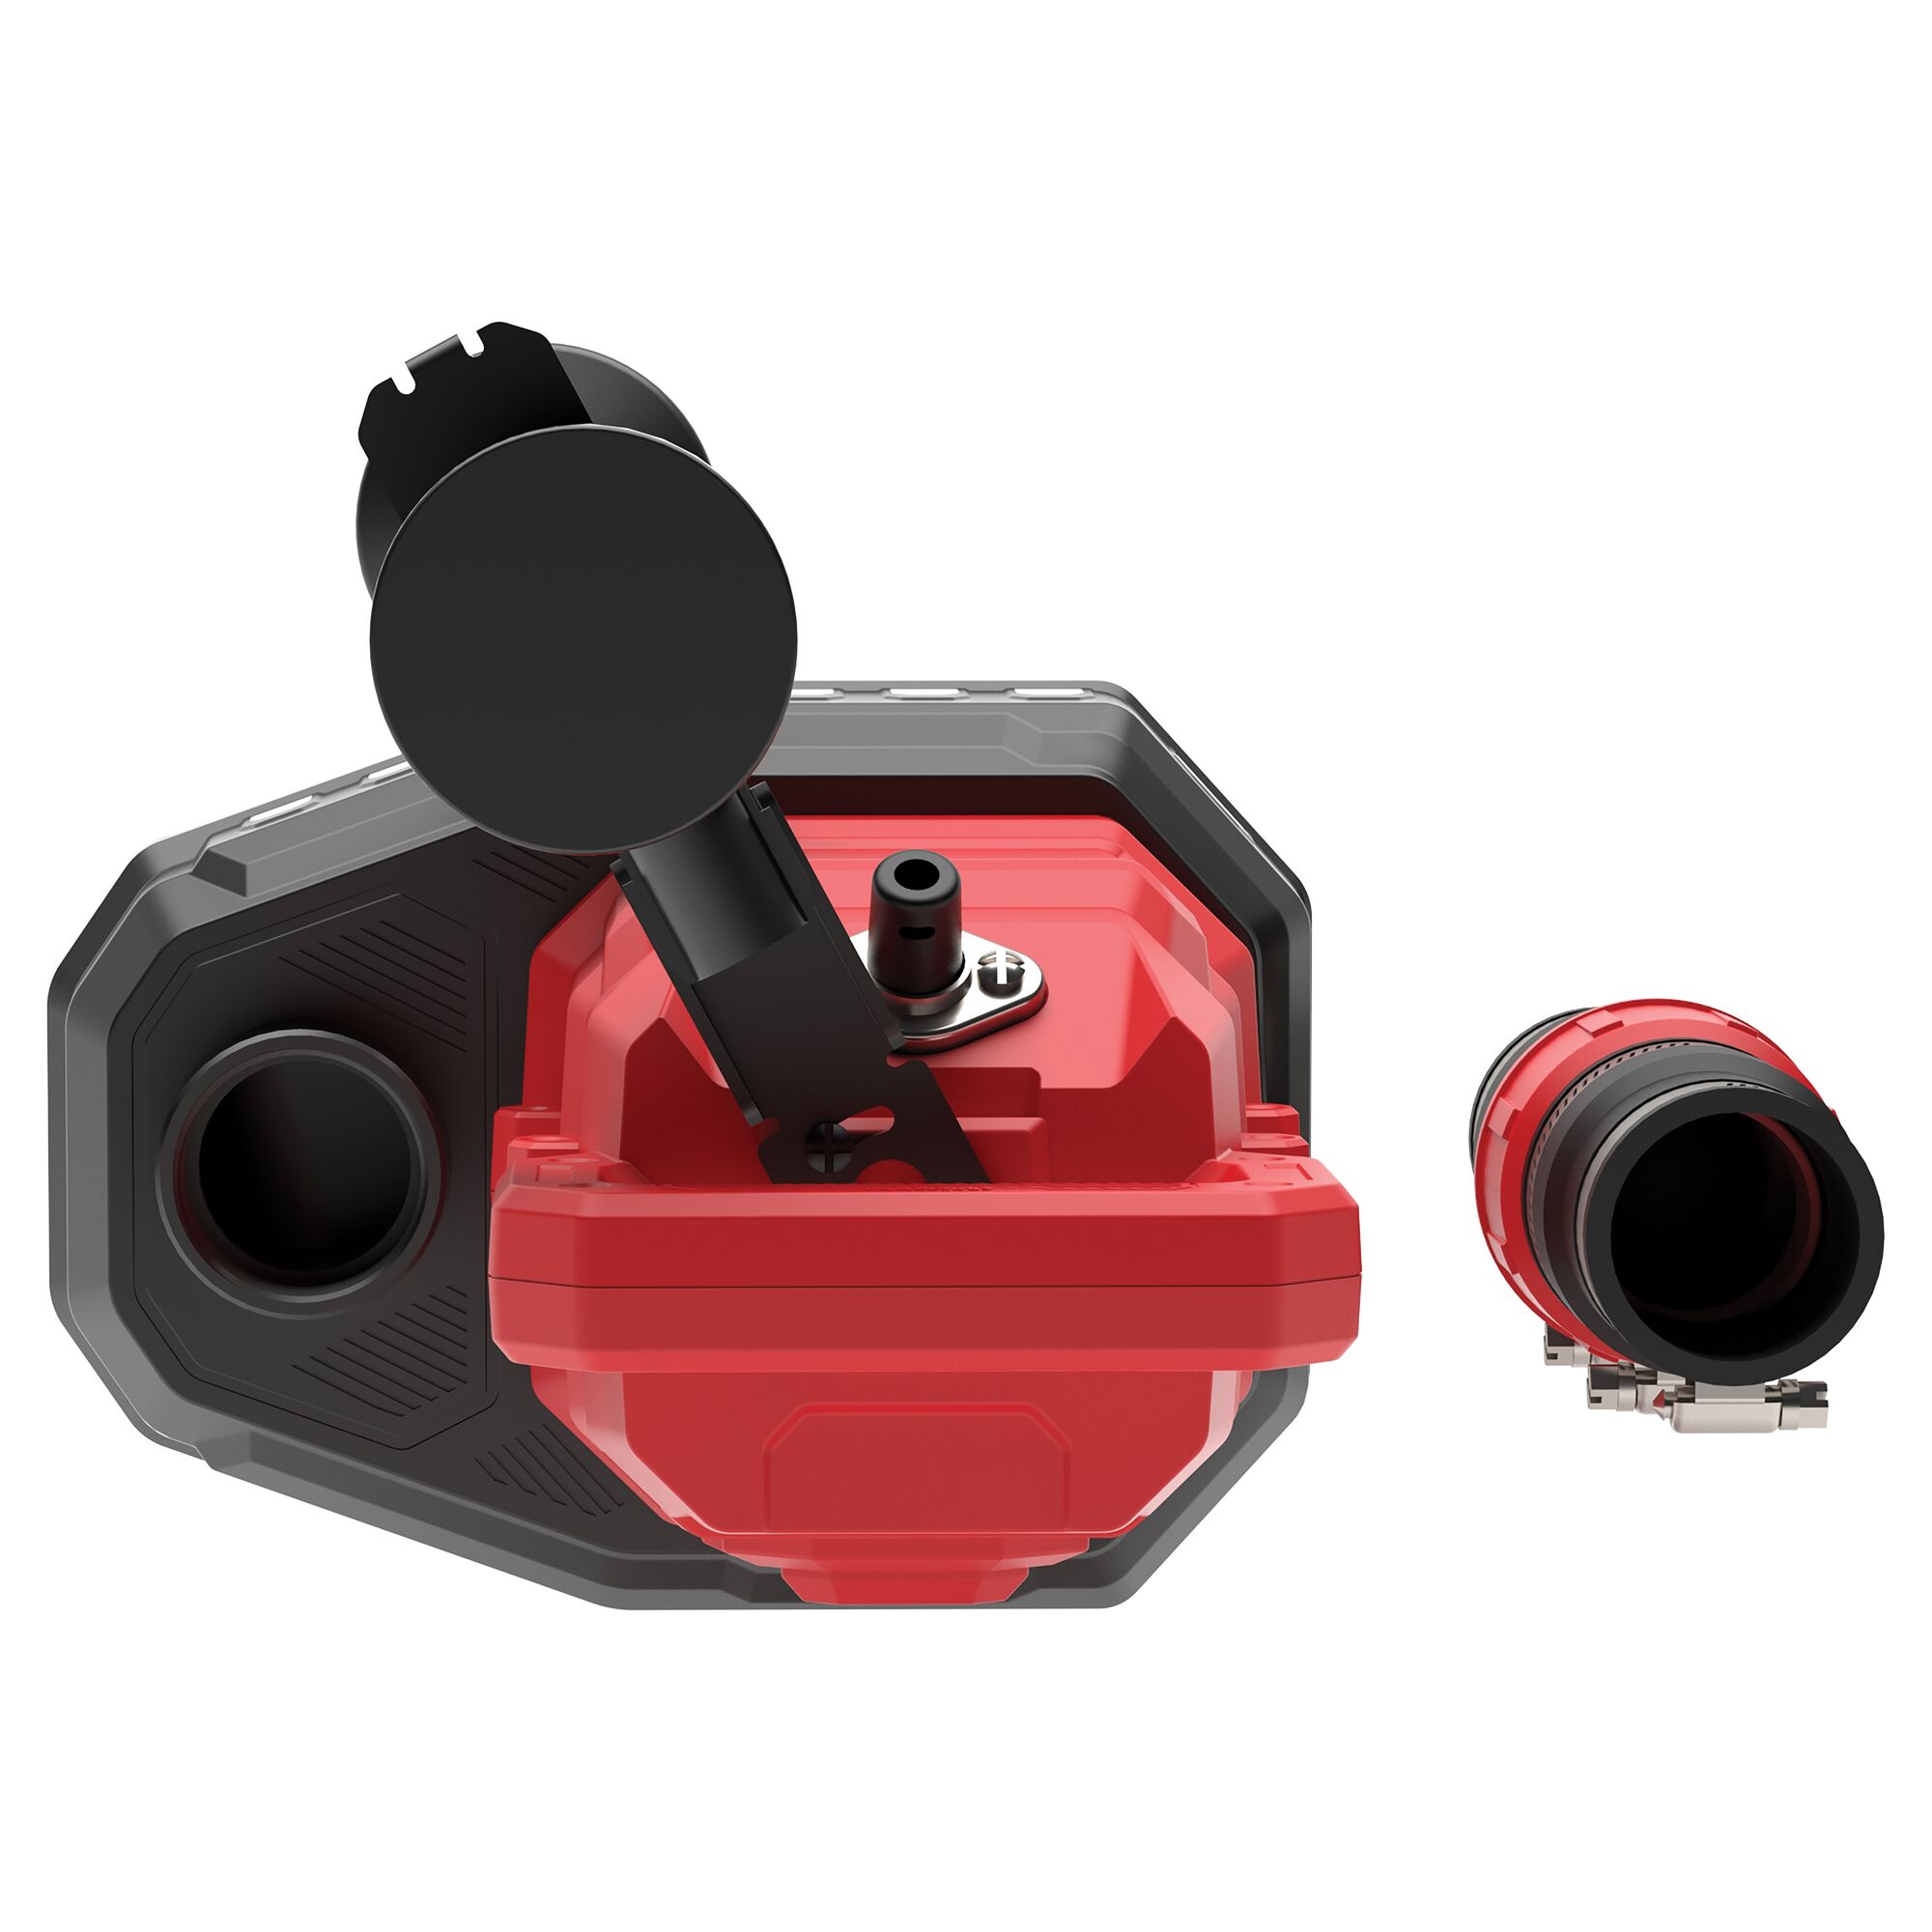 1-3HP SUMP PUMP REINFORCED THERMOPLASTIC SUBMERSIBLE AUTOMATIC VERTICAL SWITCH INCLUDES CHECK VALVE TOP VIEW